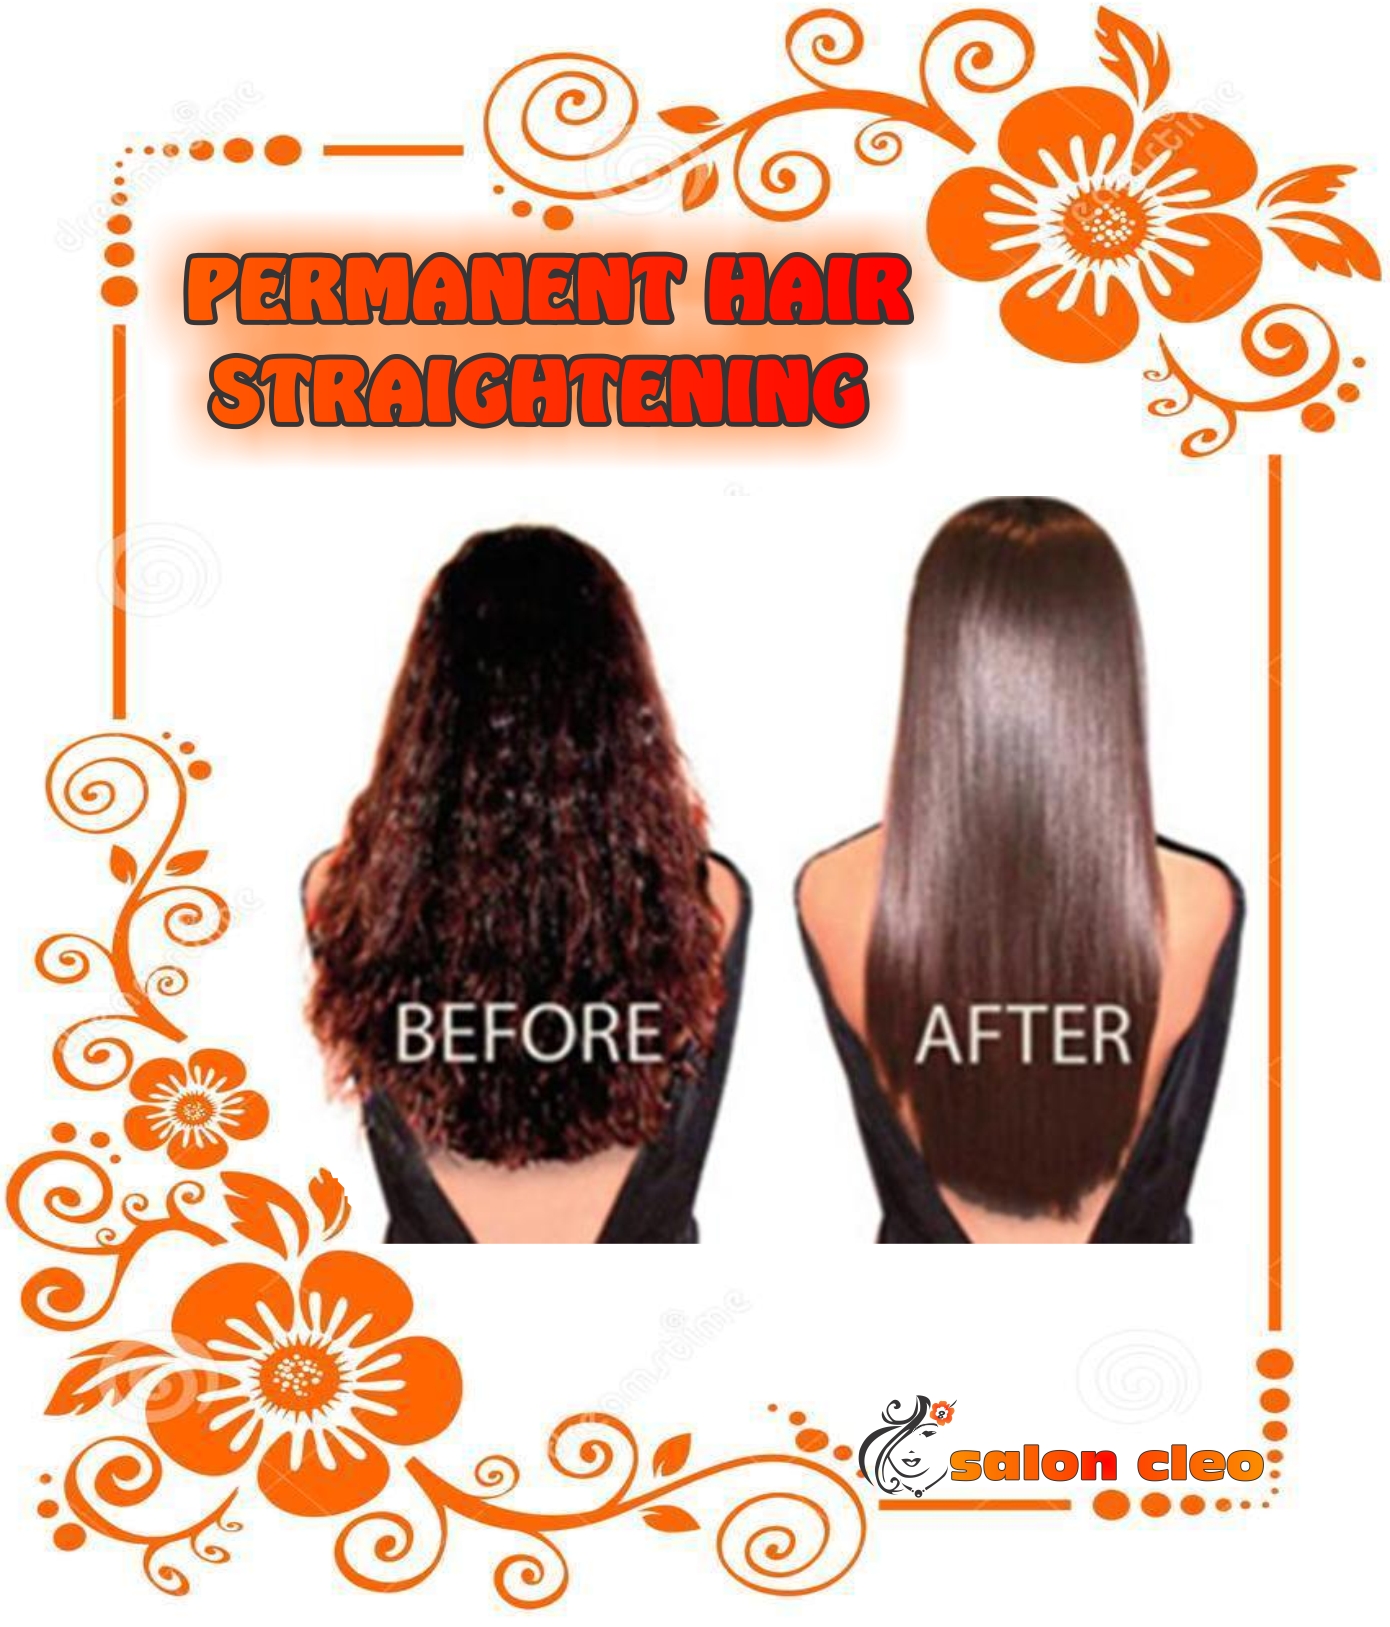 STOCKISTS OF GENUINE & ORIGINAL PERMANENT HAIR STRAIGHTENING TREATMENT DONE AT SALON CLEO DURBAN WITH GUARANTEED RESULTS. FREE PRODUCTS FOR TREATMENT AND AFTER CARE OF YOUR HAIR STRAIGHTENING TREATMENT. WE HAVE THE CHEAPEST DEAL IN KZN FOR ALL CURLY UNMANAGEABLE HAIR at SALON CLEO 0315002353 cloud 9 hair irons, ghd hair irons, coriolliss hair iron straighteners , BHE Hair iron Stylers...for the cheapest deal in all hair irons in South Africa Durban @ salon cleo 0315002353 durban phoenix 0315009998BHE Styler Hair iron launched 2015 in South Africa. Beautiful Hair Everyday all us today for a quote on your bridal package to suit your special day. call Nivi 0736100316 for all bridal packages. SALON CLEO bridal wedding packages KRYOLAN, PROFESSIONAL MAKE-UP. FOR A FLAWLESS SENSUOUS DELIIOUS GLOWING LOOK WITH A TOUCH OF EXTRAVAGANCE. KRYOLAN HAS 750 COLOR-INTENSE SHADES IS LOVED BY PROFESSIONAL MAKE-UP ARTISTS WORLDWIDE. FOUNDATIONS AND MAKE-UPS FOR THE CHEAPEST DEAL IN KRYOLAN COSMETIC PRODUCTS AT SALON CLEO PHOENIX 0315002353 ACRYLIC NAILS Finger nails are an important part of overall appearance to many women You lead a busy life , you deserve a little pampering Royal treatment , reasonable prices . its all yours at salon cleo ACRYLIC NAILS Finger nails are an important part of overall appearance to many women You lead a busy life , you deserve a little pampering Royal treatment , reasonable prices . its all yours at salon cleo Professional Hair stylist Nivi Deenanath SALON CLEO. Family business established for 30 years. with an enormous clientelle. We are a team of hair designers with the skills, the tools and the experience to create beautiful styles. We have spent years perfecting our craft so we can work together as a team to make you feel beautiful and confident and give you an amazing experience in our salon mage and personal facial looks is everything today. We at SALON CLEO give off 100% in making you look your very best with use of the correct facial products at the cheapest affordable rates. facials, waxing, threading, chemical peel facials, dermaplex facial products, justine facial products,kryolan facial costmetics products. salon cleo phoenix 0315002353 0315009998 GARCINIA CAMBOGIA WONDER WEIGHT LOSS CAPSULES now available. COOL LIPOLYSIS FAT FREEZING WEIGHT LOSS TREATEMENT PROCEDURE done at salon cleo. FAT BURNER WEIGHT LOSS CAPSULE ALSO AVAILABLE AT SALON CLEO DURBAN. FERRADIC HEAT WEIGHT LOSS PADS & ELECTRO MAGNETIC TONING WEIGHT LOSS PADS...These procedures now available at salon cleo . call NIVI 0736100316 today for a quick fix to you weight loss resolutions  SALON CLEO FOR THE CHEAPEST GHD HAIR IRON IN DURBAN SALON CLEO HAS THE CHEAPEST DEAL IN CLOUD NINE HAIR IRON IN DURBAN SALON CLEO ONLY KEEPS GENUINE HAIR IRON STRAIGHTENERS SALON CLEO FOR THE CHEAPEST PRICE ON CARAOLIS HAIR IRONSSALON CLEO FOR THE CHEAPEST PRICE DEAL ON ALL CORIOLIS HAIR IRONS GHD GHD GHD GHD SALES GHD CHEAPEST GHD CHEAPEST GHD HAIR IRONS SALON CLEO SALON CLEO GHD SALON CLEO CLOUD 9 SALON CLEO CLOUD NINE SALON CLEO CARAOLIS HAIR IRON SALON CLEO CORIOLIS HAIR IRONS GHD HAIR IRON REPAIRS CLOUD NINE HAIR IRON REPAIRS DURBAN CORIOLIS HAIR IRON REPAIRS DURBAN RCS CREDIT CARDS ACCEPTED HERE AT OUR STORE FOR PURCHASE OF YOUR CORIOLLIS HAIR IRON.RCS PURCHASES GHD HAIRS IRONS RCS PURCHASES CLOUD 9 HAIR IRONS RCS PURCHASES CLOUD NINE HAIR IRON APPLICATIONS NOW DONE INSTORE FOR AN RCS CREDIT CARD & FEEDBACK WITH 48 HOURS.COROILIS HAIR IRON REPAIRS DURBAN HAIR IRON REPAIR CENTRE DURBAN GHD REPAIRS DURBAN GHD HAIR IRON REPAIRS PROFFESSIONALLY DONE IN DURBAN PHOENIX  CHEAPEST PRICE ON ALL HAIR IRONS GHD CLOUD 9 CLOUD NINE CARIOLIS CORIOLIS GHD HAIR IRONS DURBAN SALON CLEO PHOENIX Salon Cleo is the cheapest Stockists  of GHD HAIR IRONS, CLOUD 9 HAIR IRONS, CARIOLIS HAIR IRON GHD NEW RANGE HAIR IRONS:GHD ECLIPSE NOW AVAILABLE AT SALON CLEO PHOENIX DURBAN 0315009998 CLOUD NINE MENS MINI STYLERS...CLOUD 9 THE TOUCH HAIR IRON...NEW RANGE OF THE CLOUD NINE SERIES.CLOUD 9 ON AN EXTREMLY LOW SPECIAL AT R1750 (CASH ONLY) ONLY AT SALON CLEO KZN DURBAN 0315002353....0315009998SALON CLEO HAS THE  CHEAPEST DEAL ON CLOUD NINE HAIR IRON STRAIGHTENERS in Durban Kzn.Salon Cleo is the cheapest Stockists of GHD HAIR IRONS, CLOUD 9 HAIR IRONS, CORIOLLIS HAIR IRONCLOUD 9 MENS MINI STYLERS...CLOUD NINE THE TOUCH HAIR IRON....CLOUD 9  BHE HAIR IRON STYLERSBeautiful Hair Everyday  The unique BHE Styler protects your hair while you style, thanks to its SMART plates that help to keep your hair healthy and strong.  The BHE Styler SMART plates include: Kera Therapy protein infused plates assists in smoothing the cuticles and heal the hair, in time of split ends and damaged hair Keratin is a naturally occurring protein, which is a vital element in strong, healthy hair. Next generation ceramic plates are infused with Keratin proteins that transfer to your hair during styling and last the life of the product GHD CLOUD9 BHE CORIOLISS HAIR IRON STRAIGHTENERS HAIR IRON STYLERS